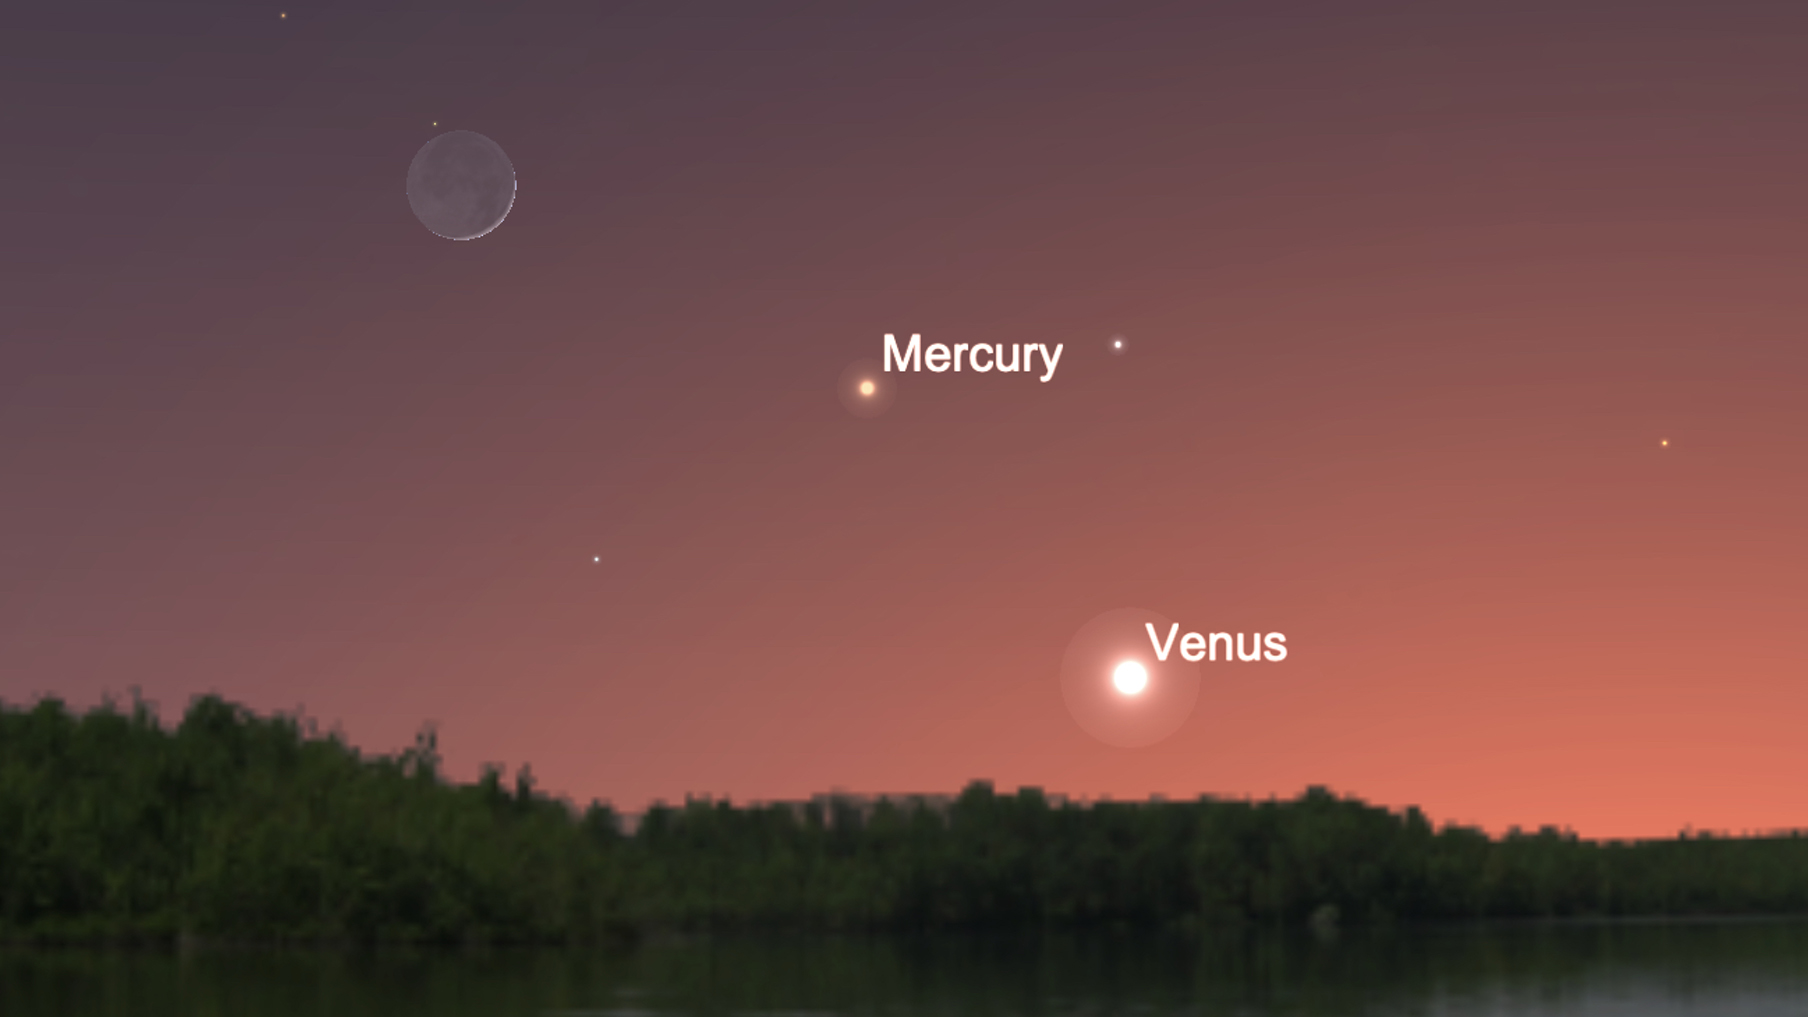 Can We See Mercury From Earth The Earth Images